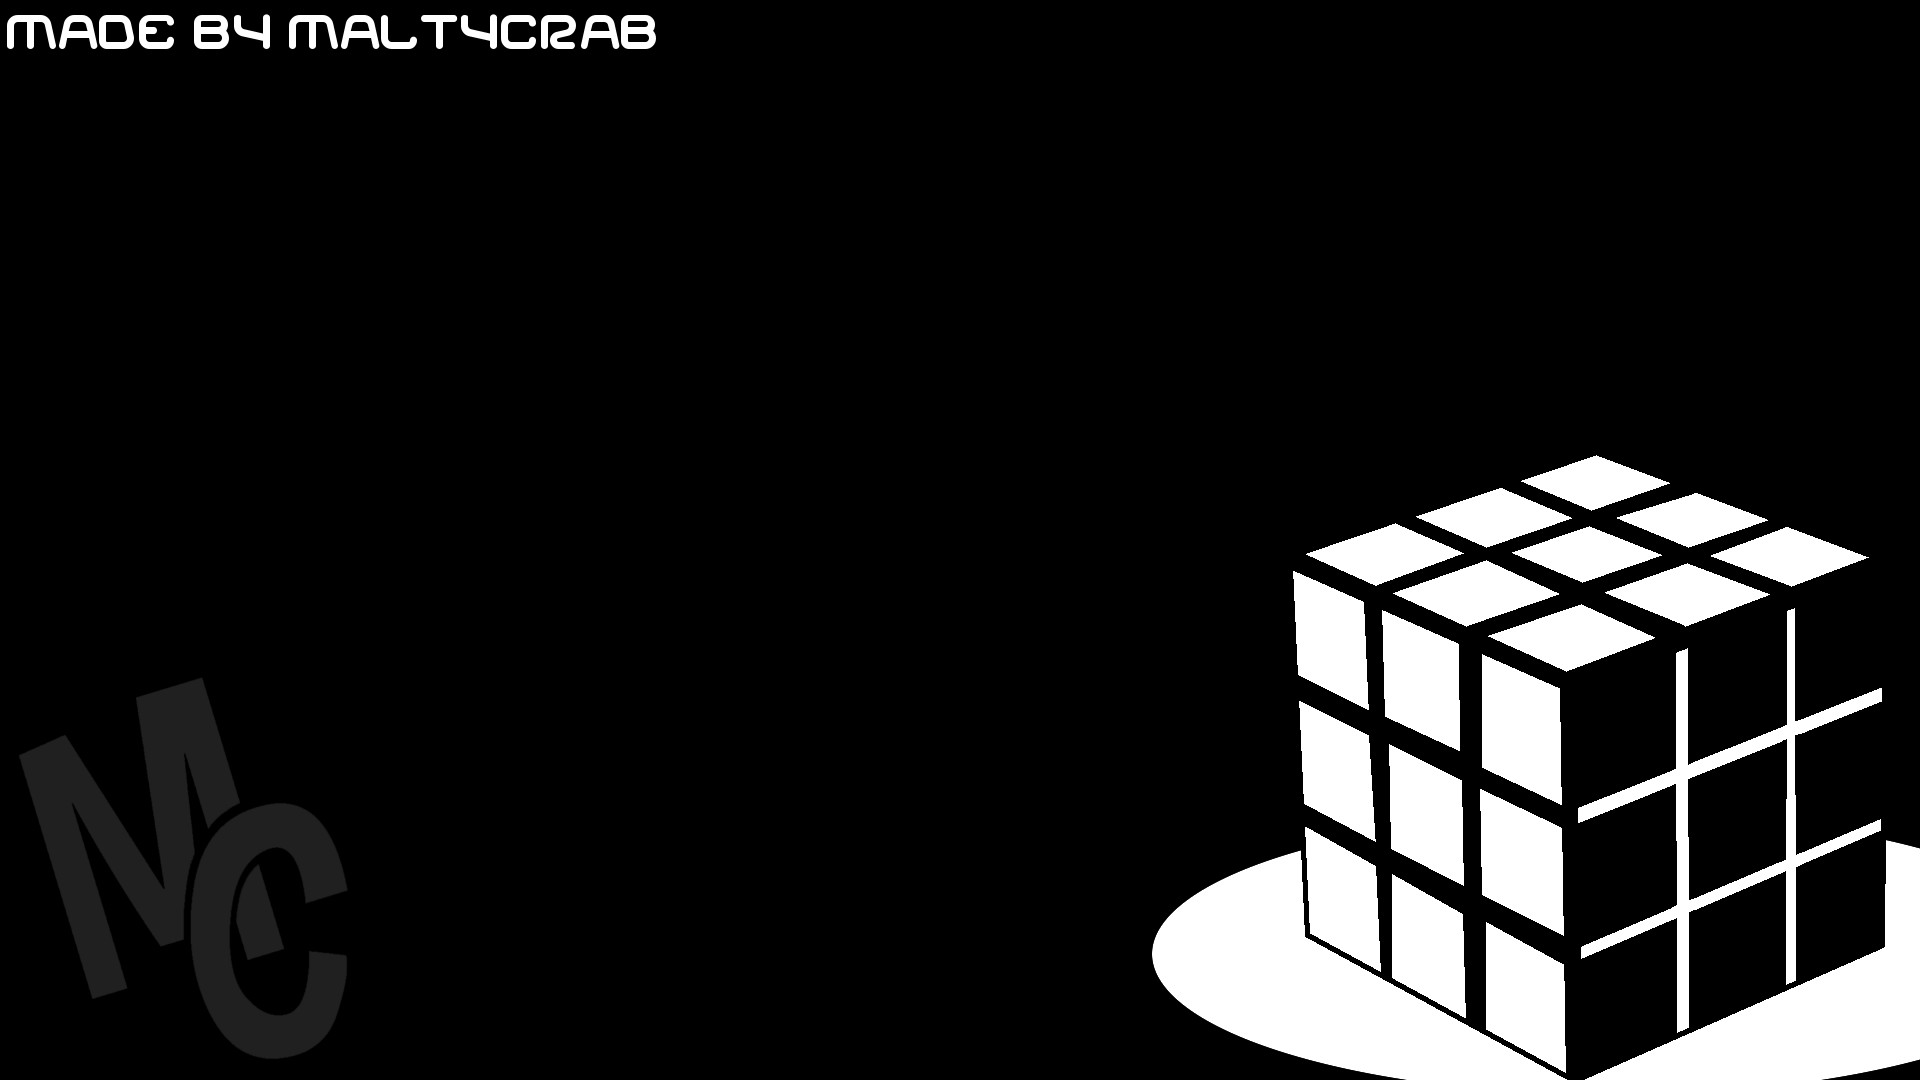 Rubiks Cube Background Black and White by MaltyCrab